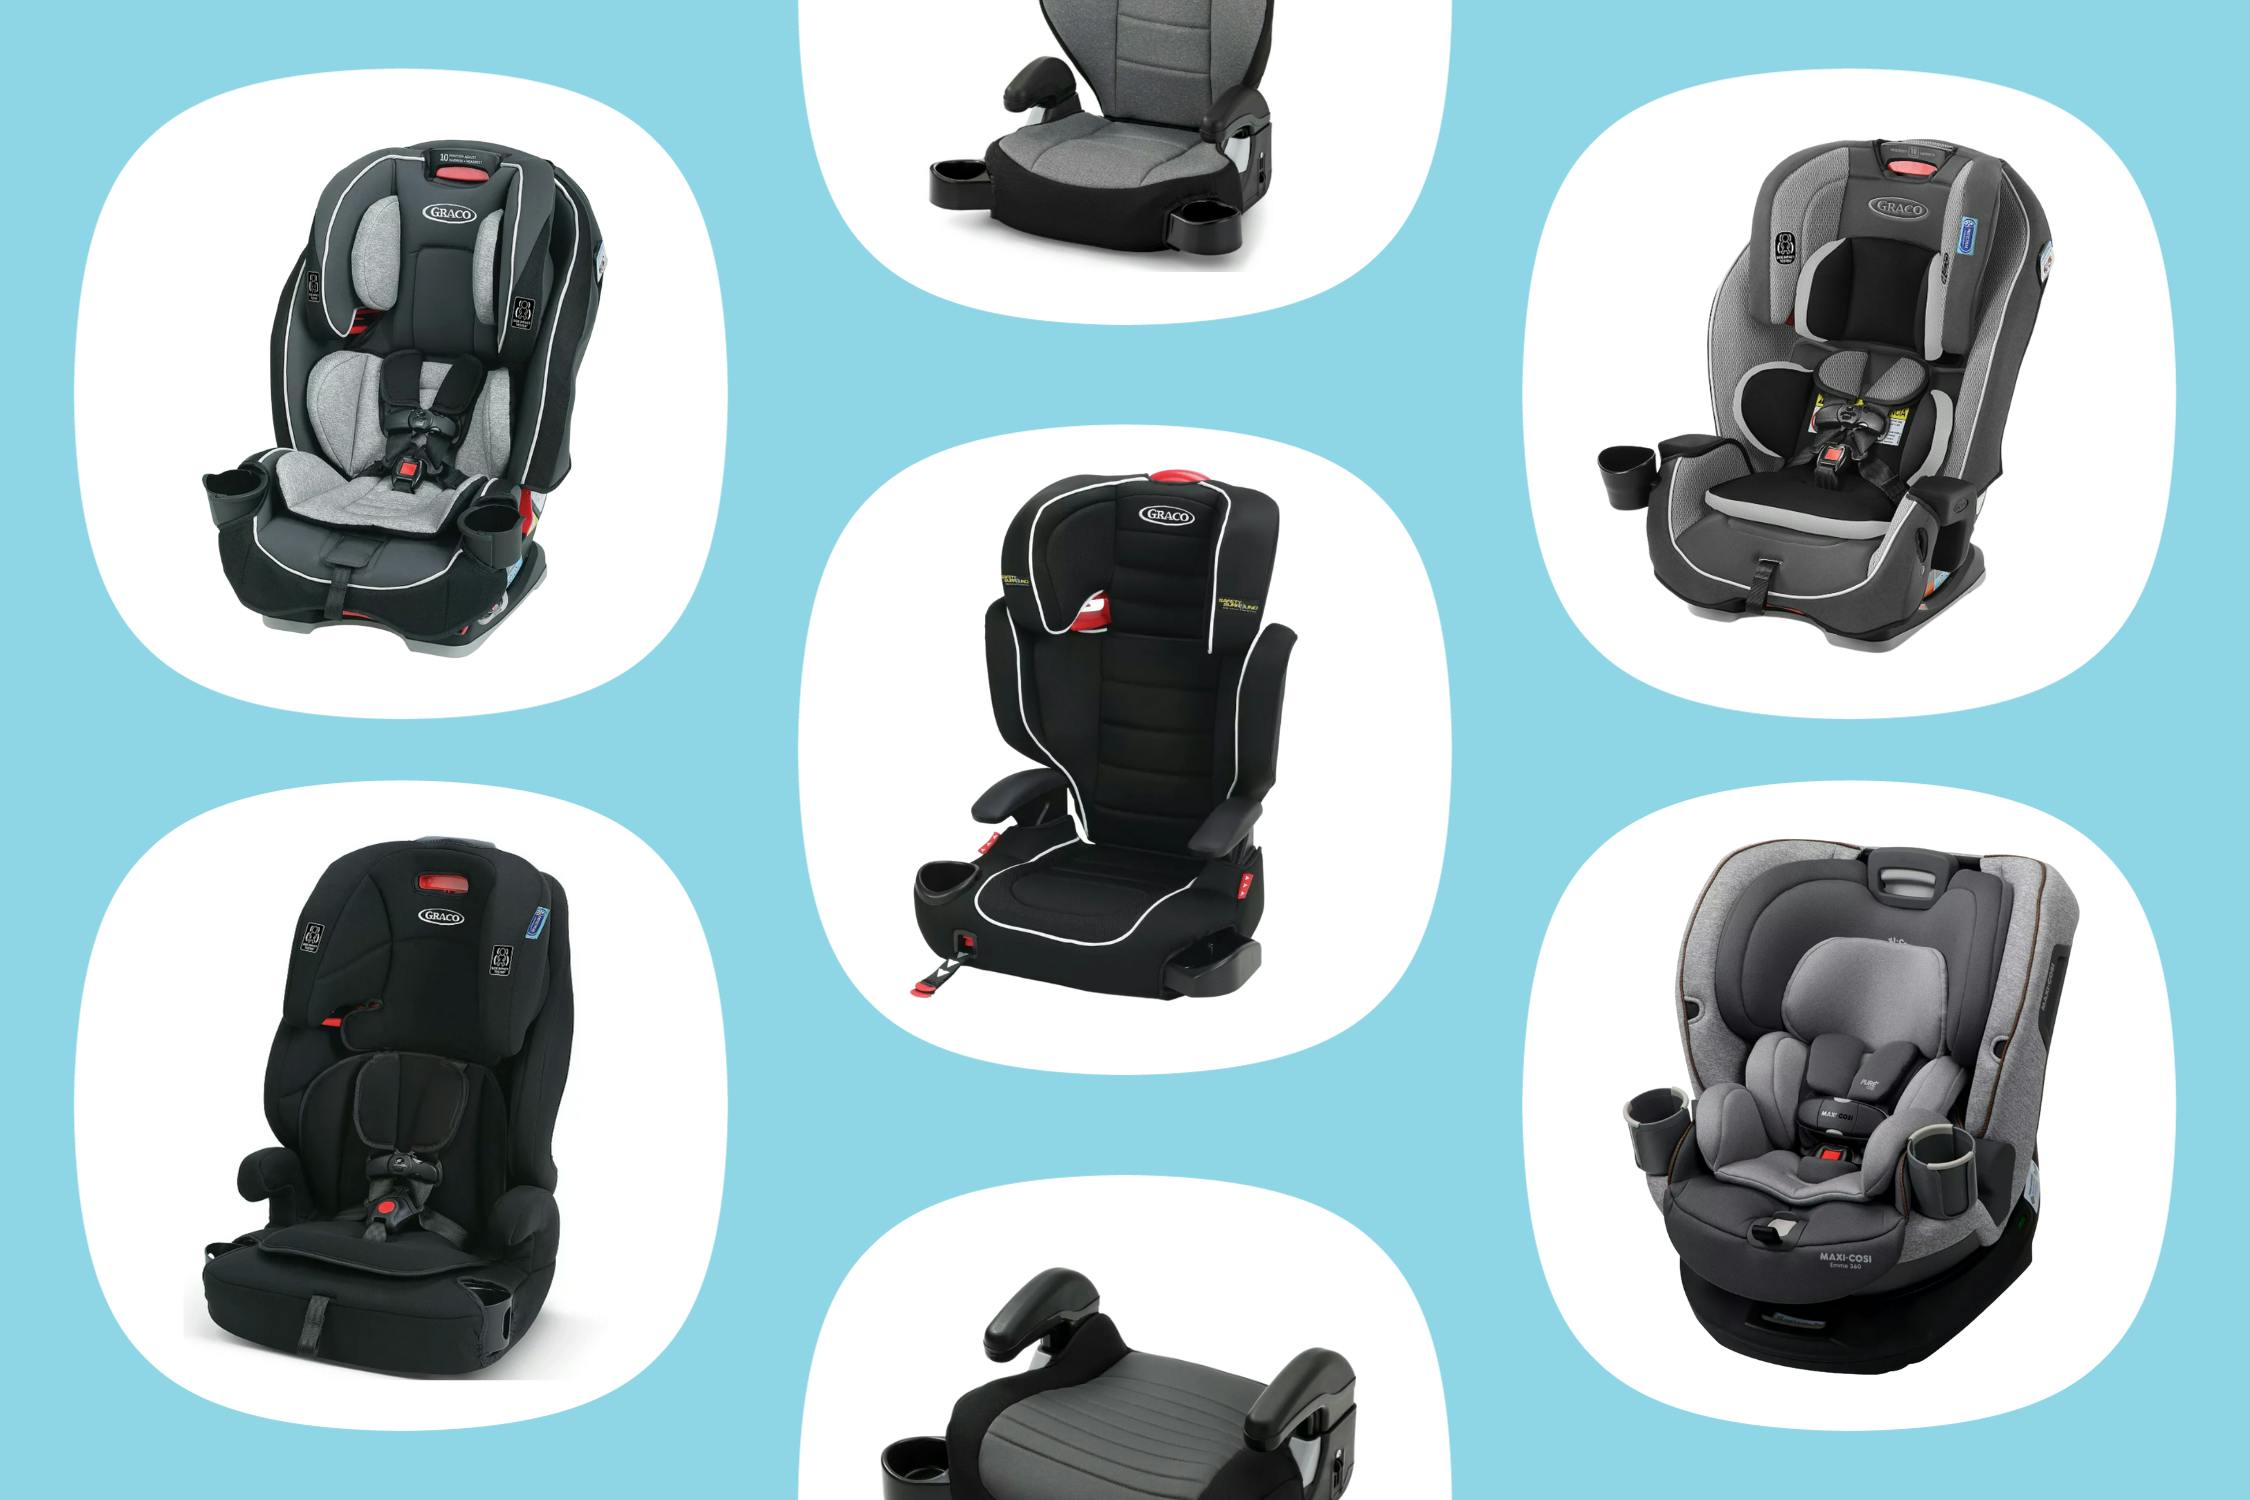 Graco Car Seat Lasts Ten Years, $82 off for Black Friday